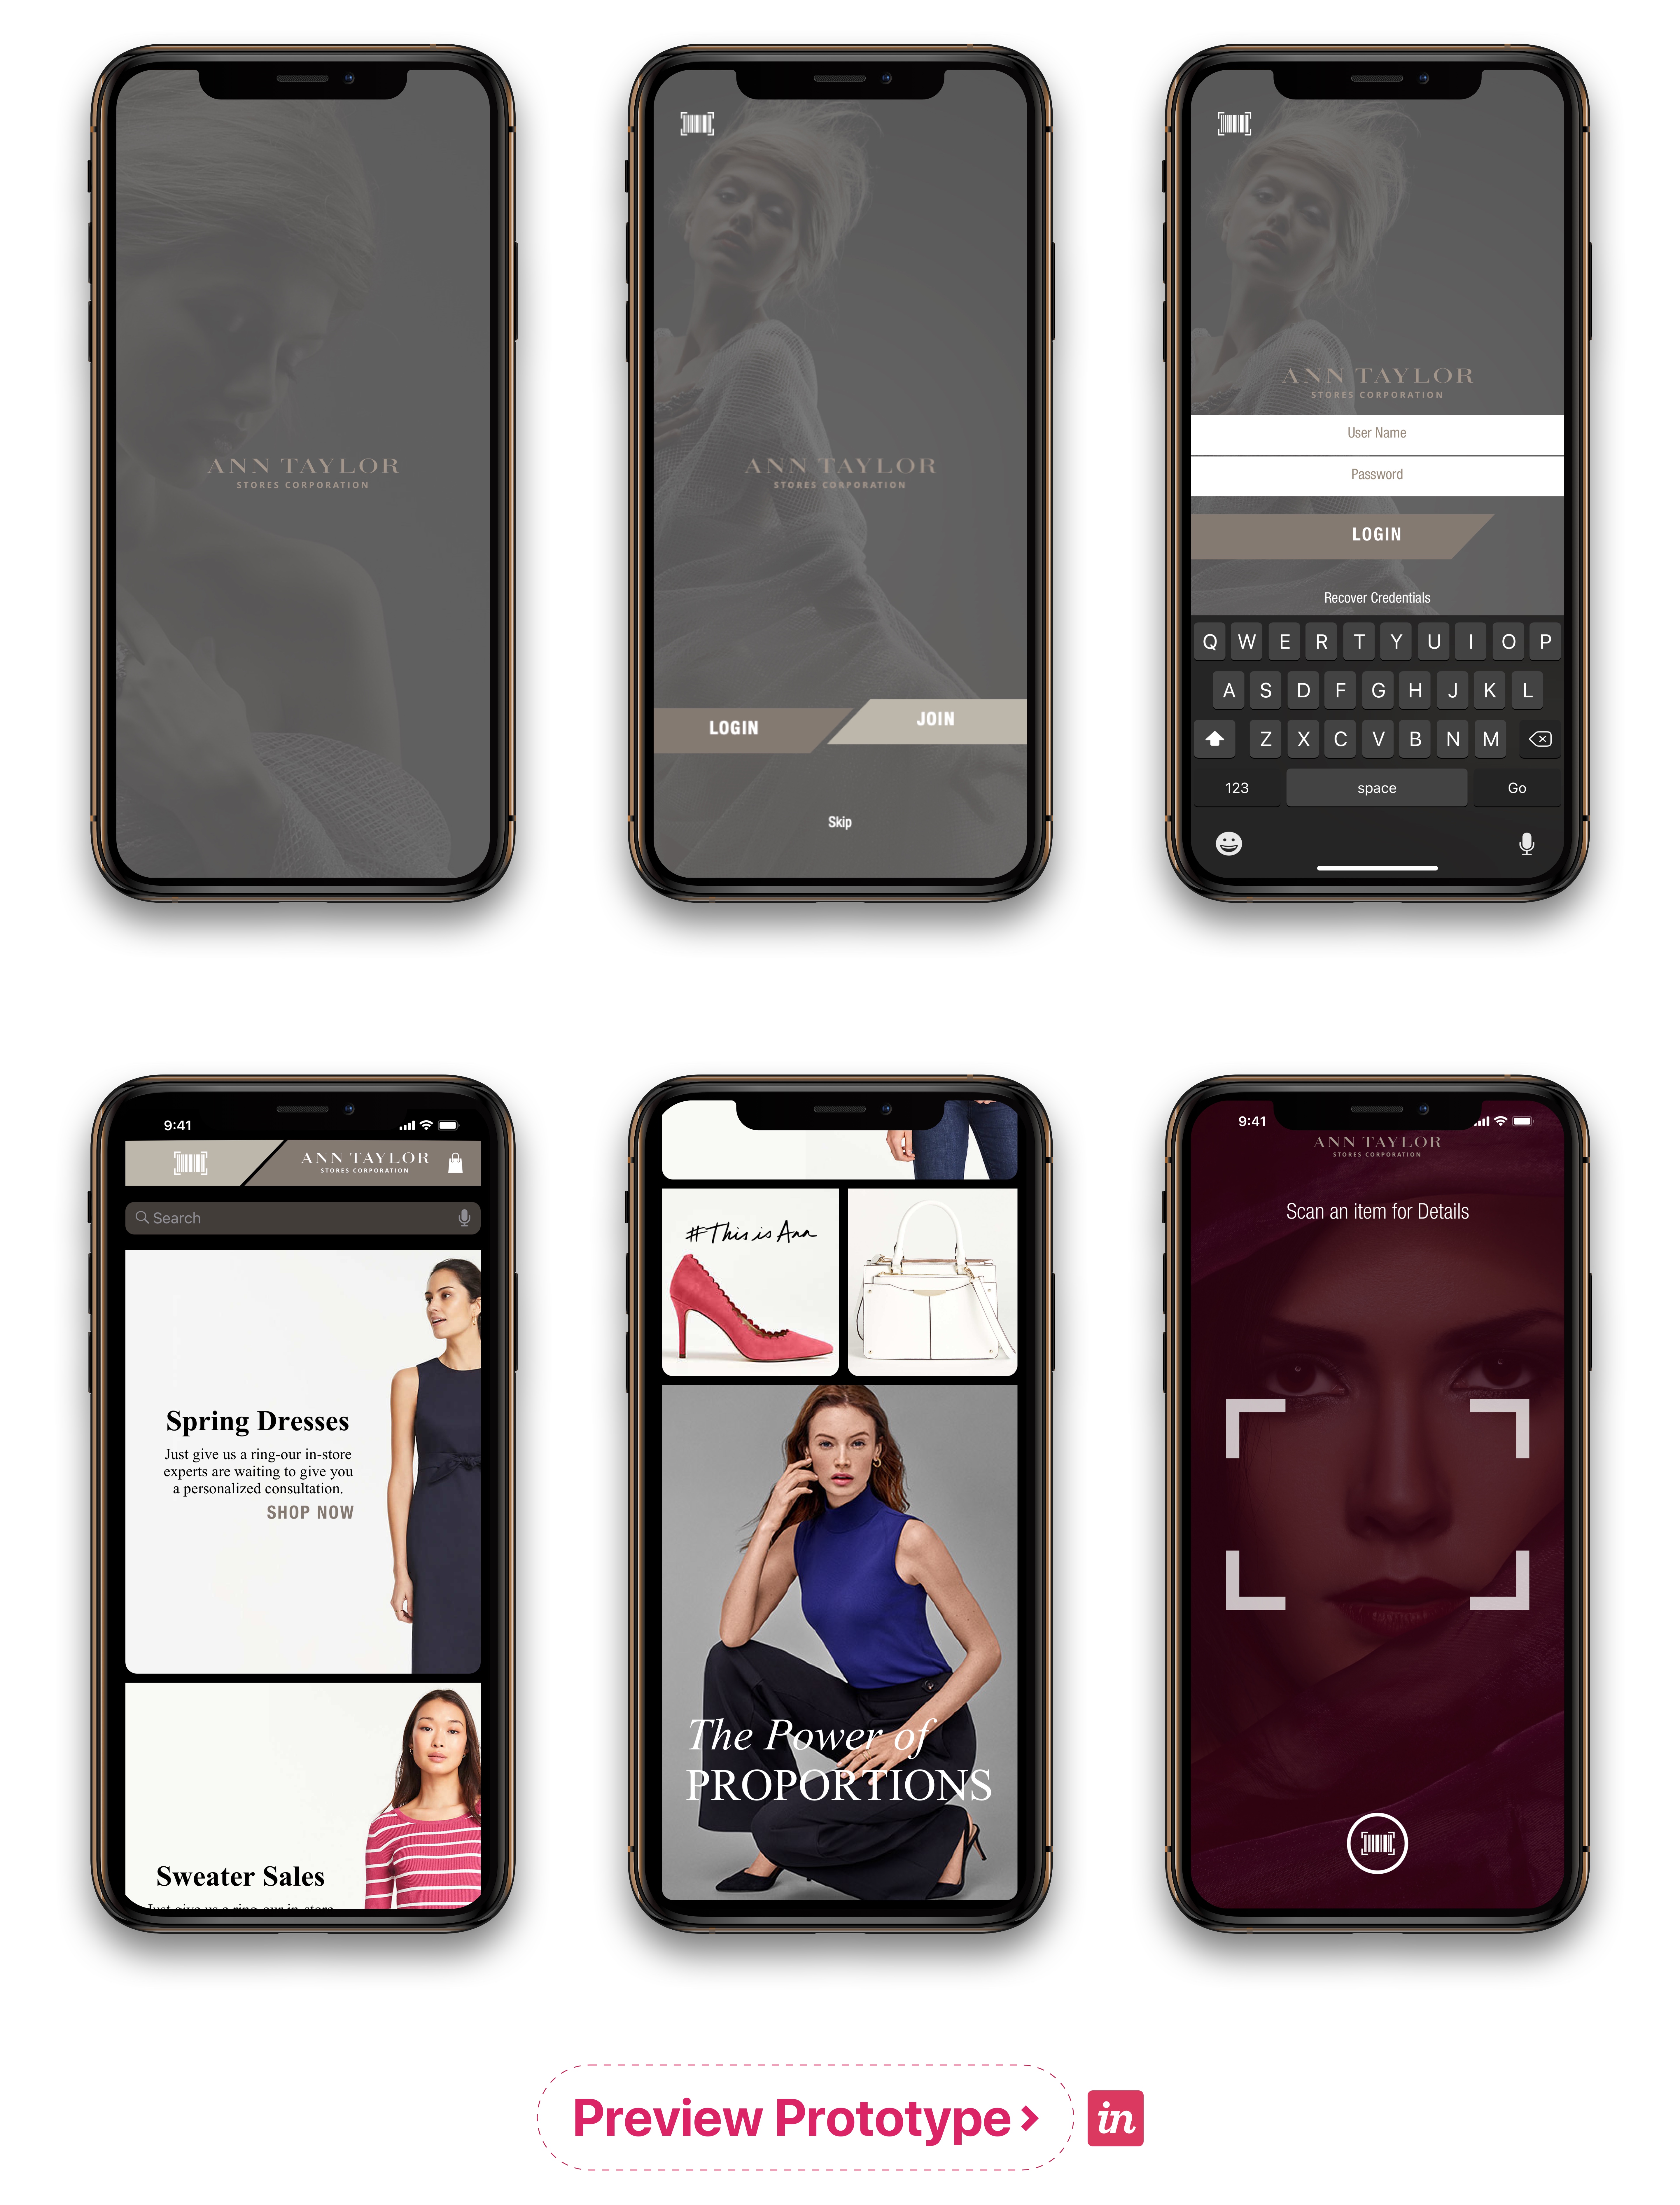 Ann Taylor iPhone UX by Moera Creative